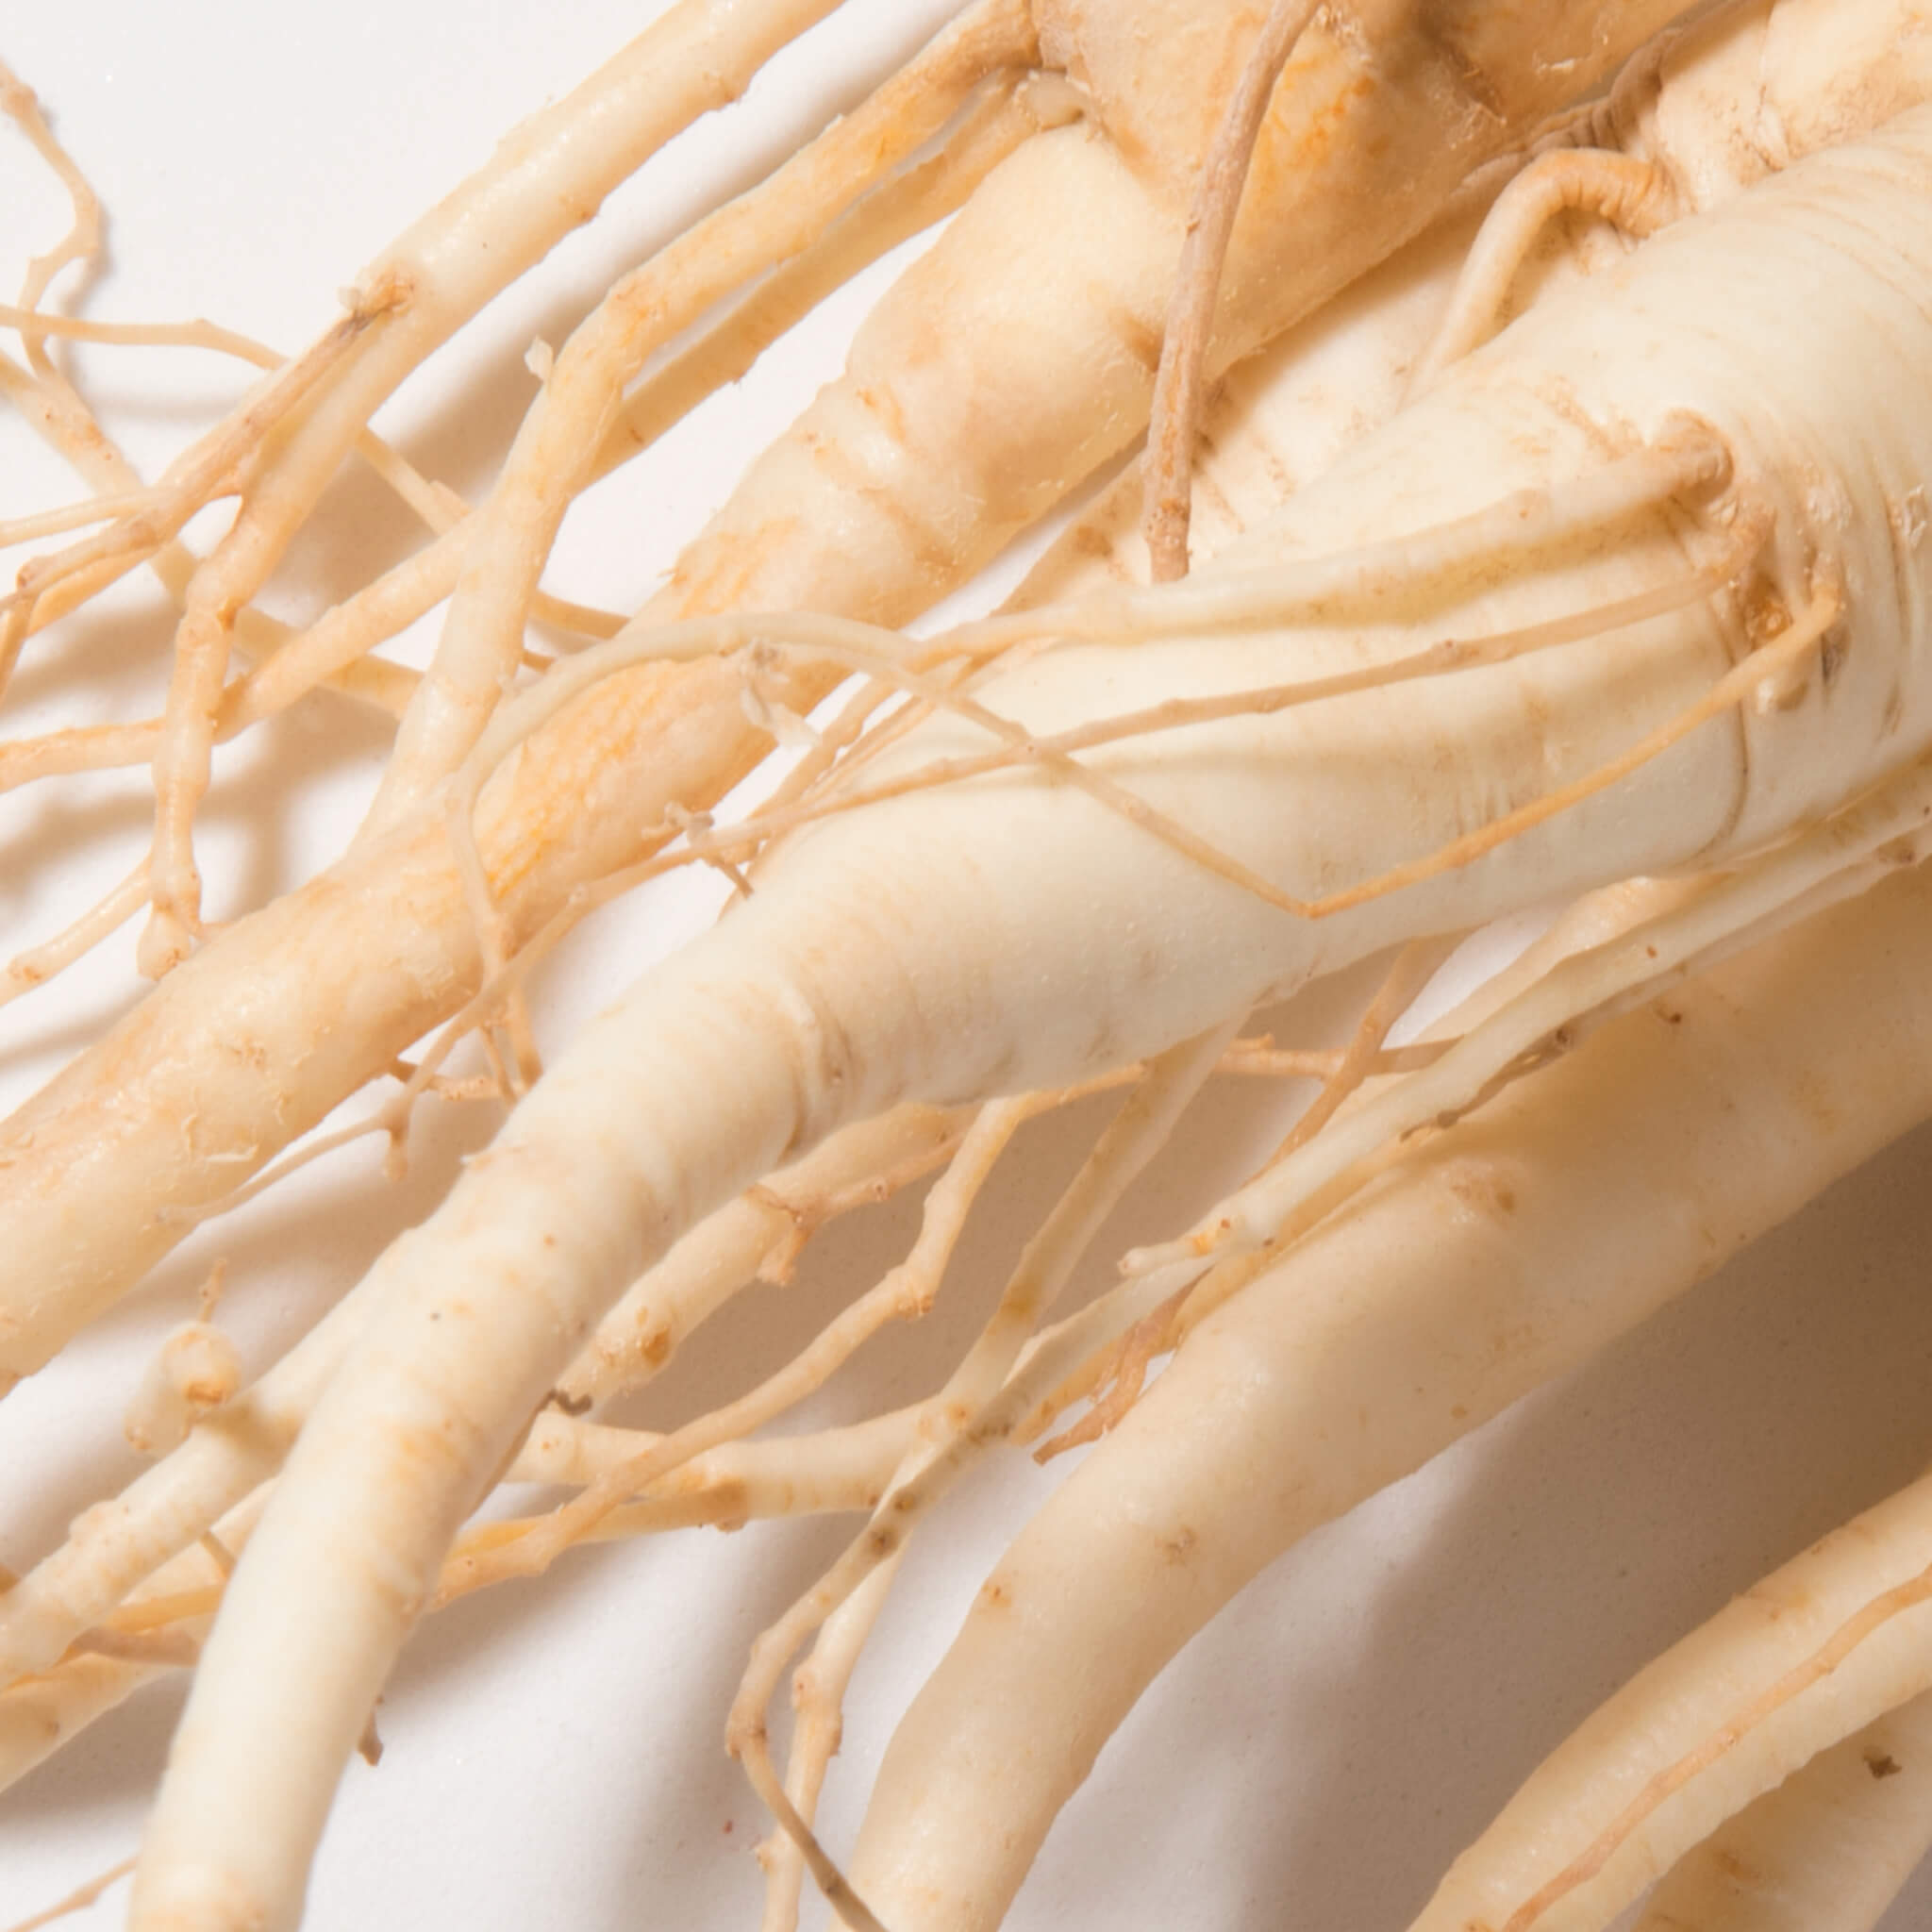 Product Page Key Ingredients: Ginseng